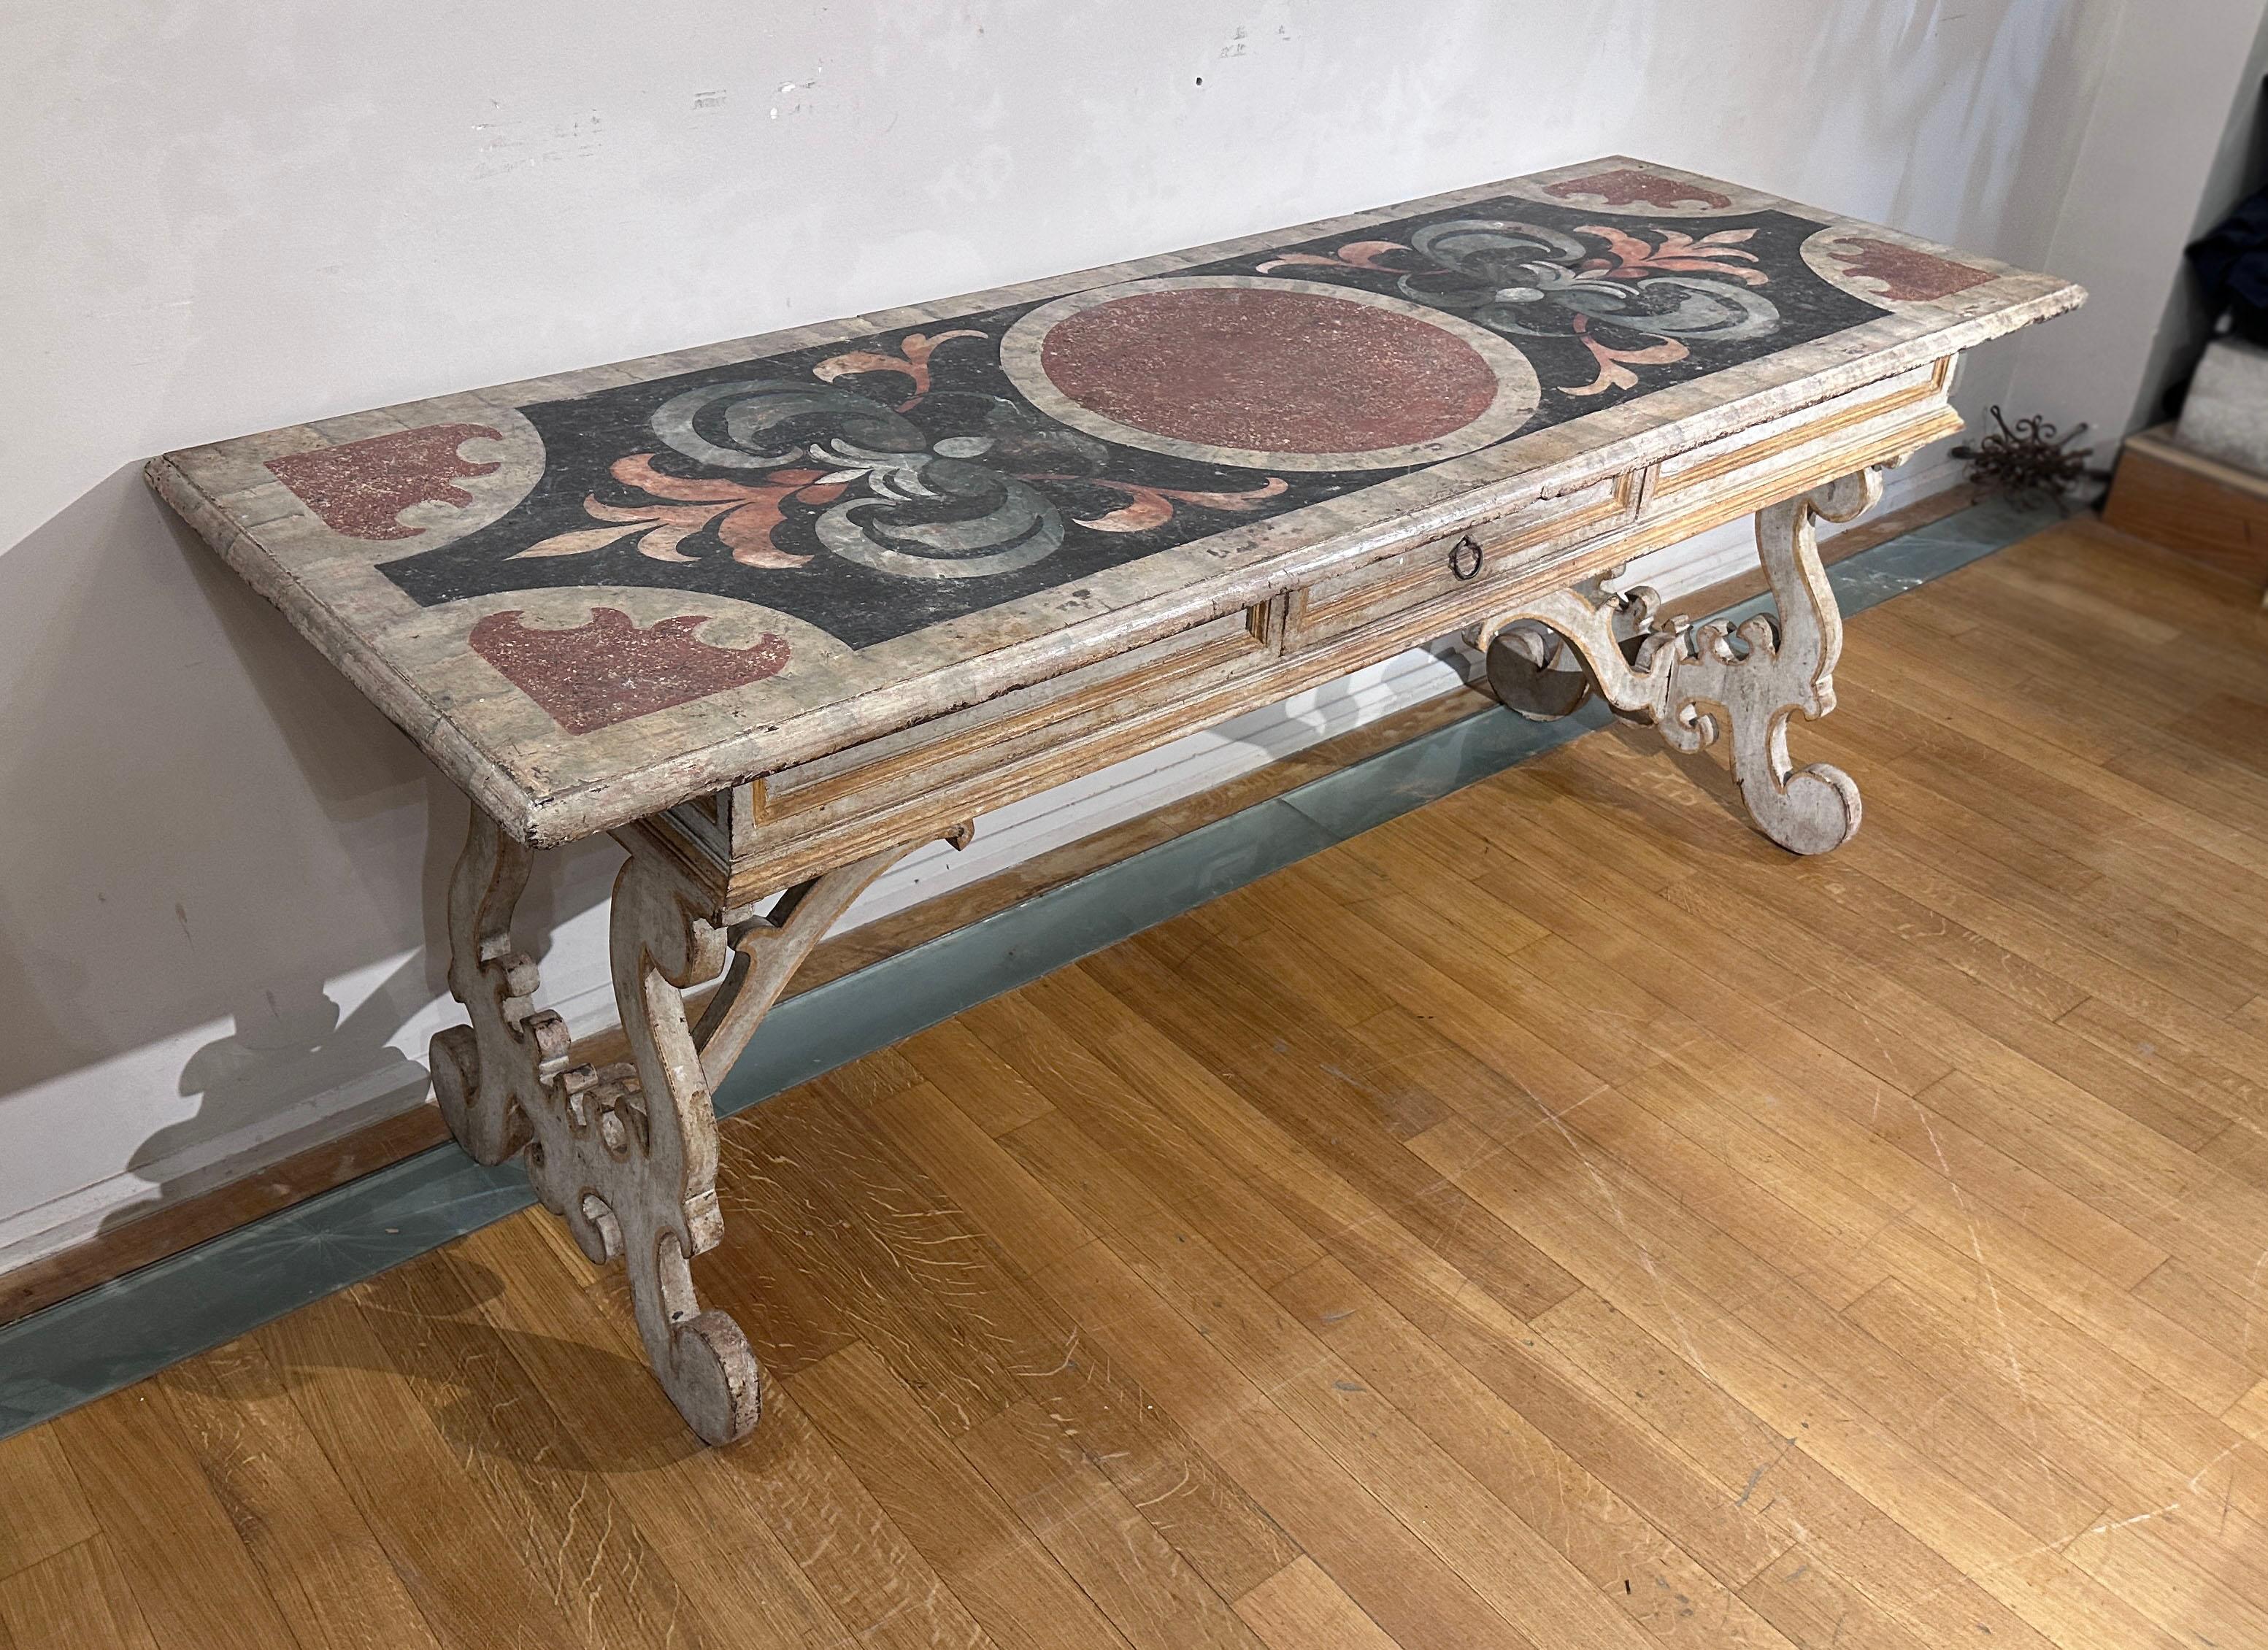 Elegant table made around the end of the 17th century by artisans from the Marche region in painted fir wood. Its design is characterized by a rectangular top, supported by lyre-shaped legs. The pictorial decorations of the top feature motifs that